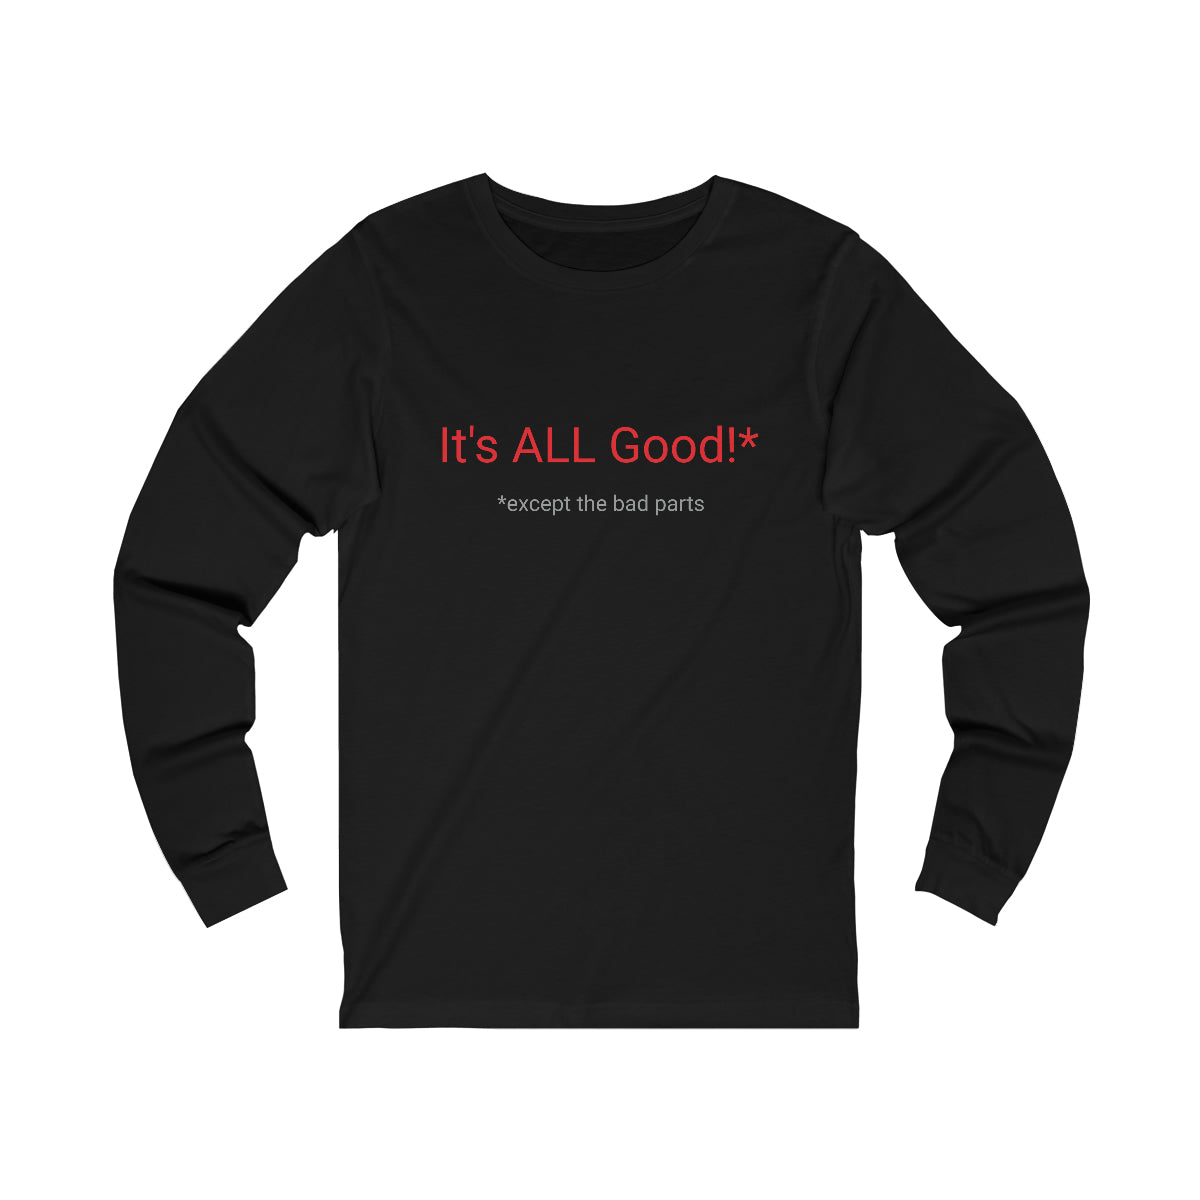 It's ALL Good!*  *except for the bad parts - Unisex Jersey Long Sleeve Tee